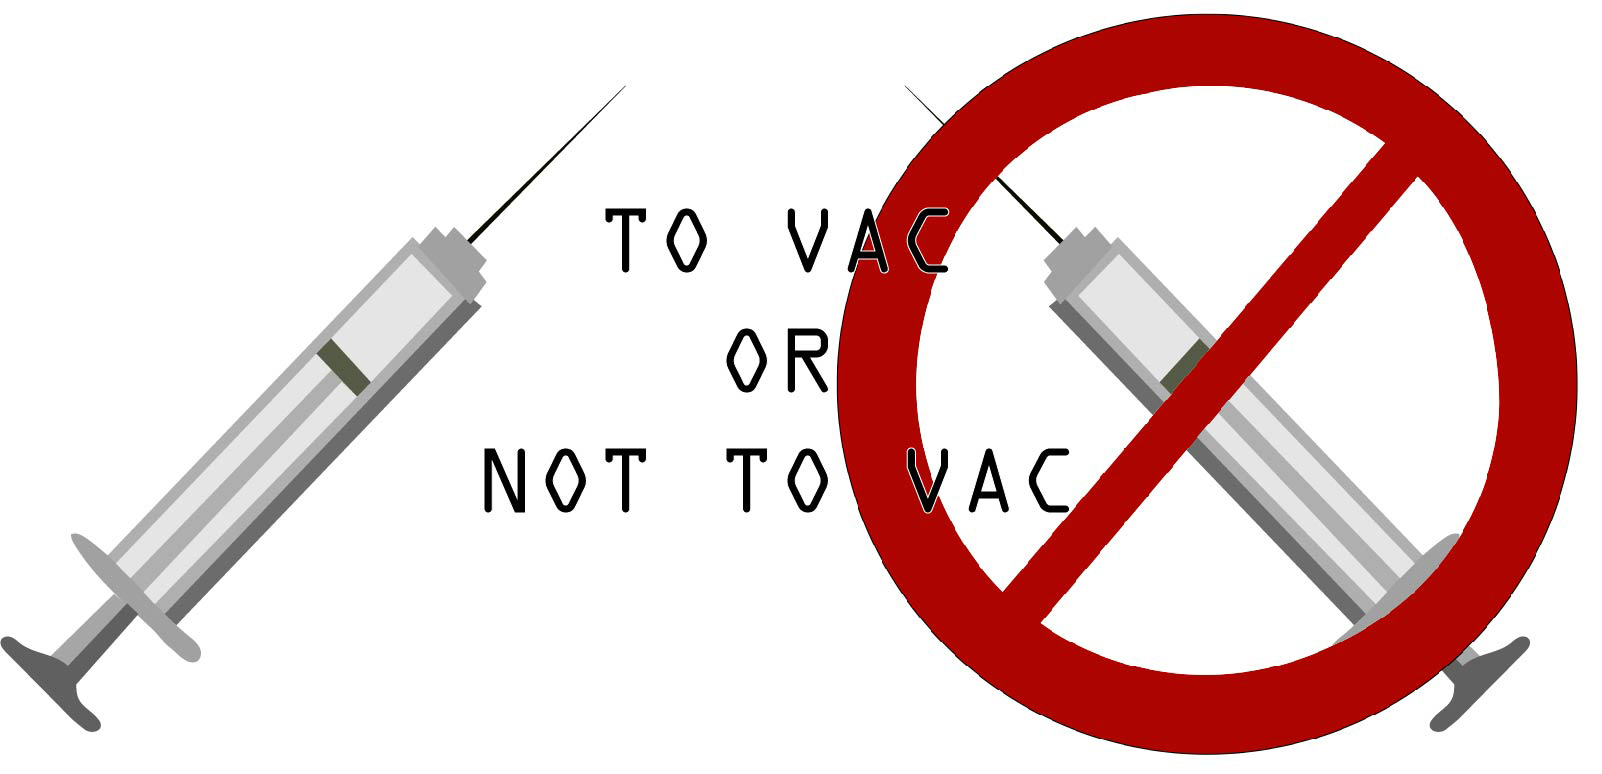 Vaccination Pro Con: Should people get vaccinated?